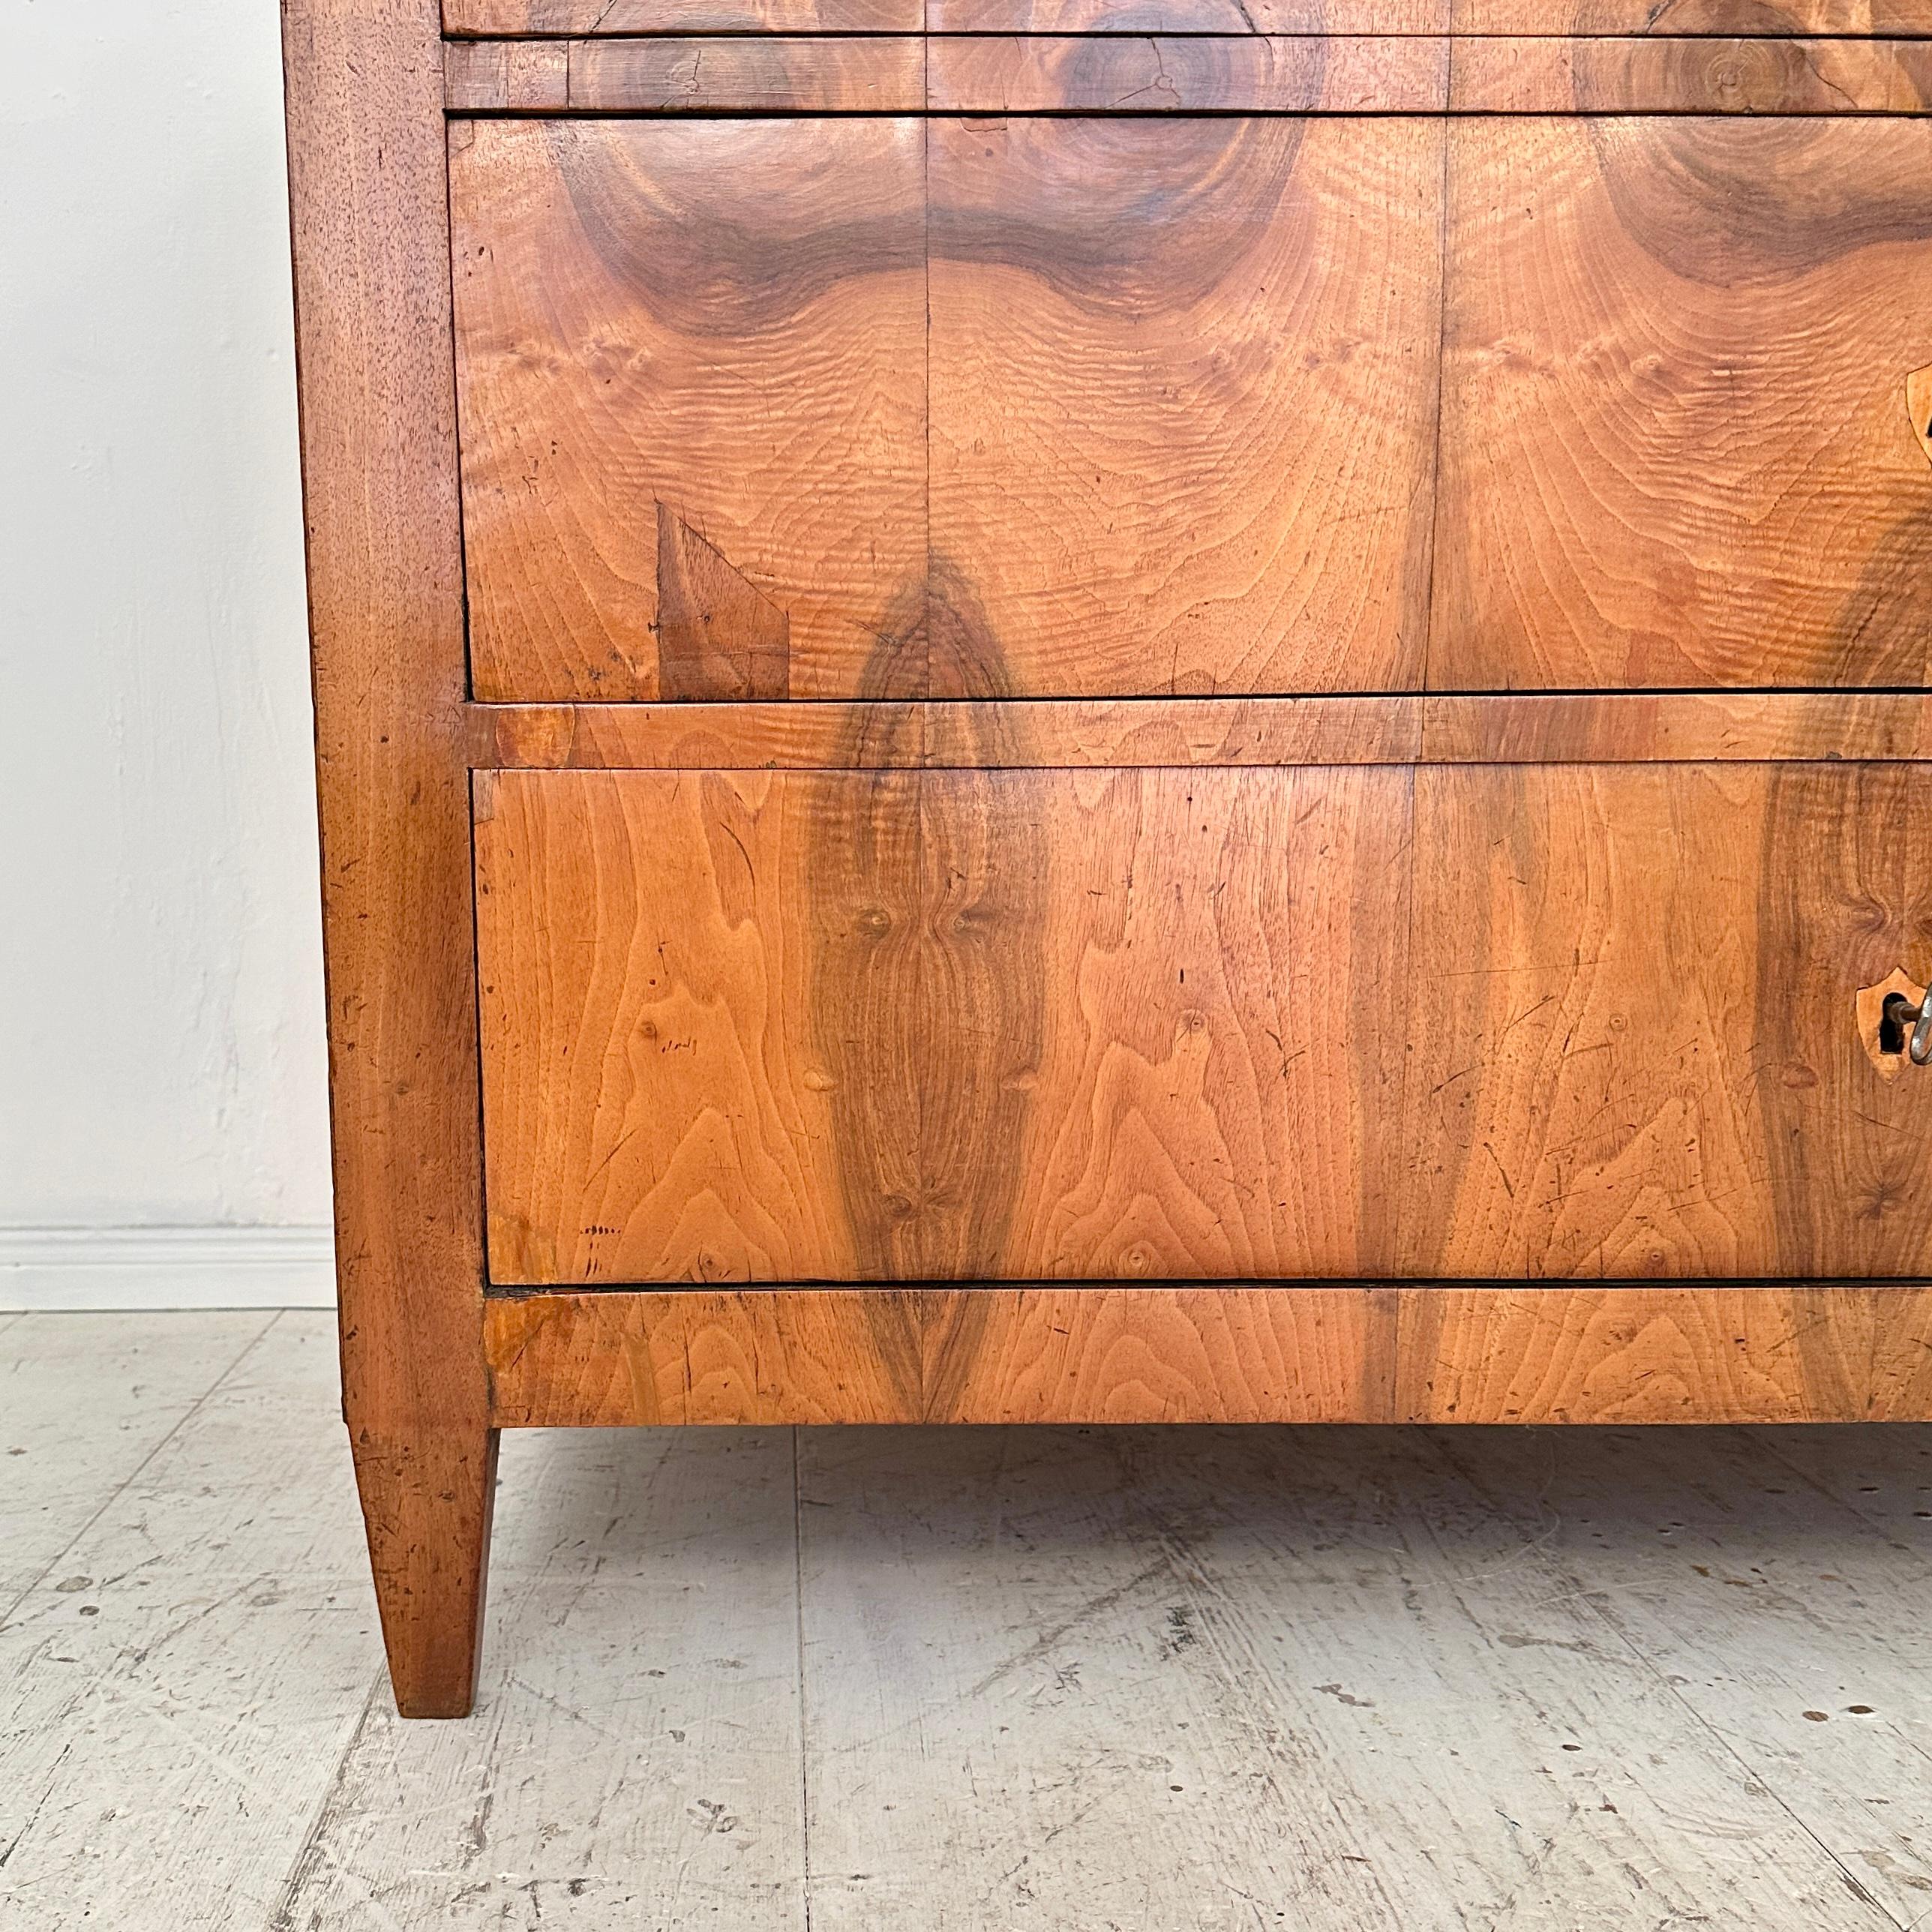 19th Century German Biedermeier Chest of Drawers in Walnut with 3 Drawers, 1820 For Sale 3